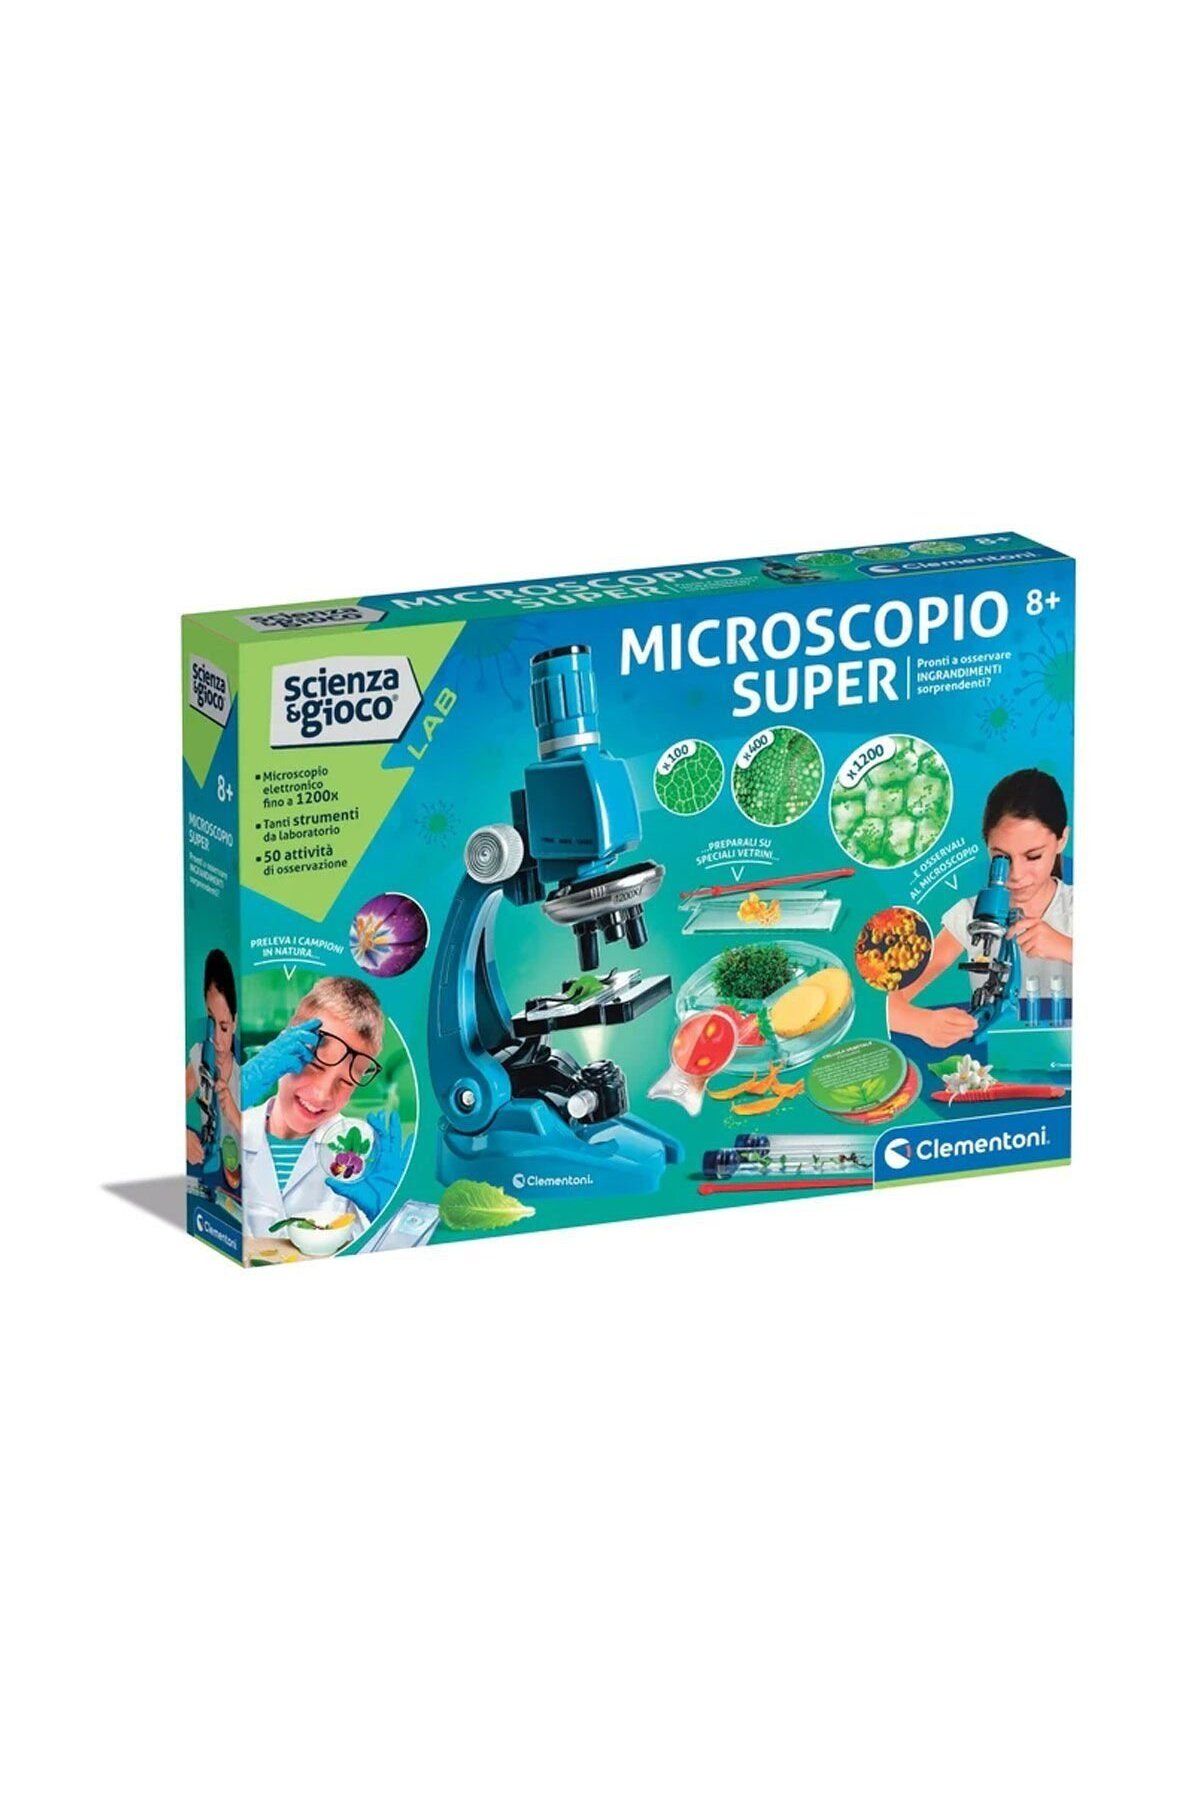 Clementoni 64473 Science and Play - Super Microscope +8 years CLM.H.64473